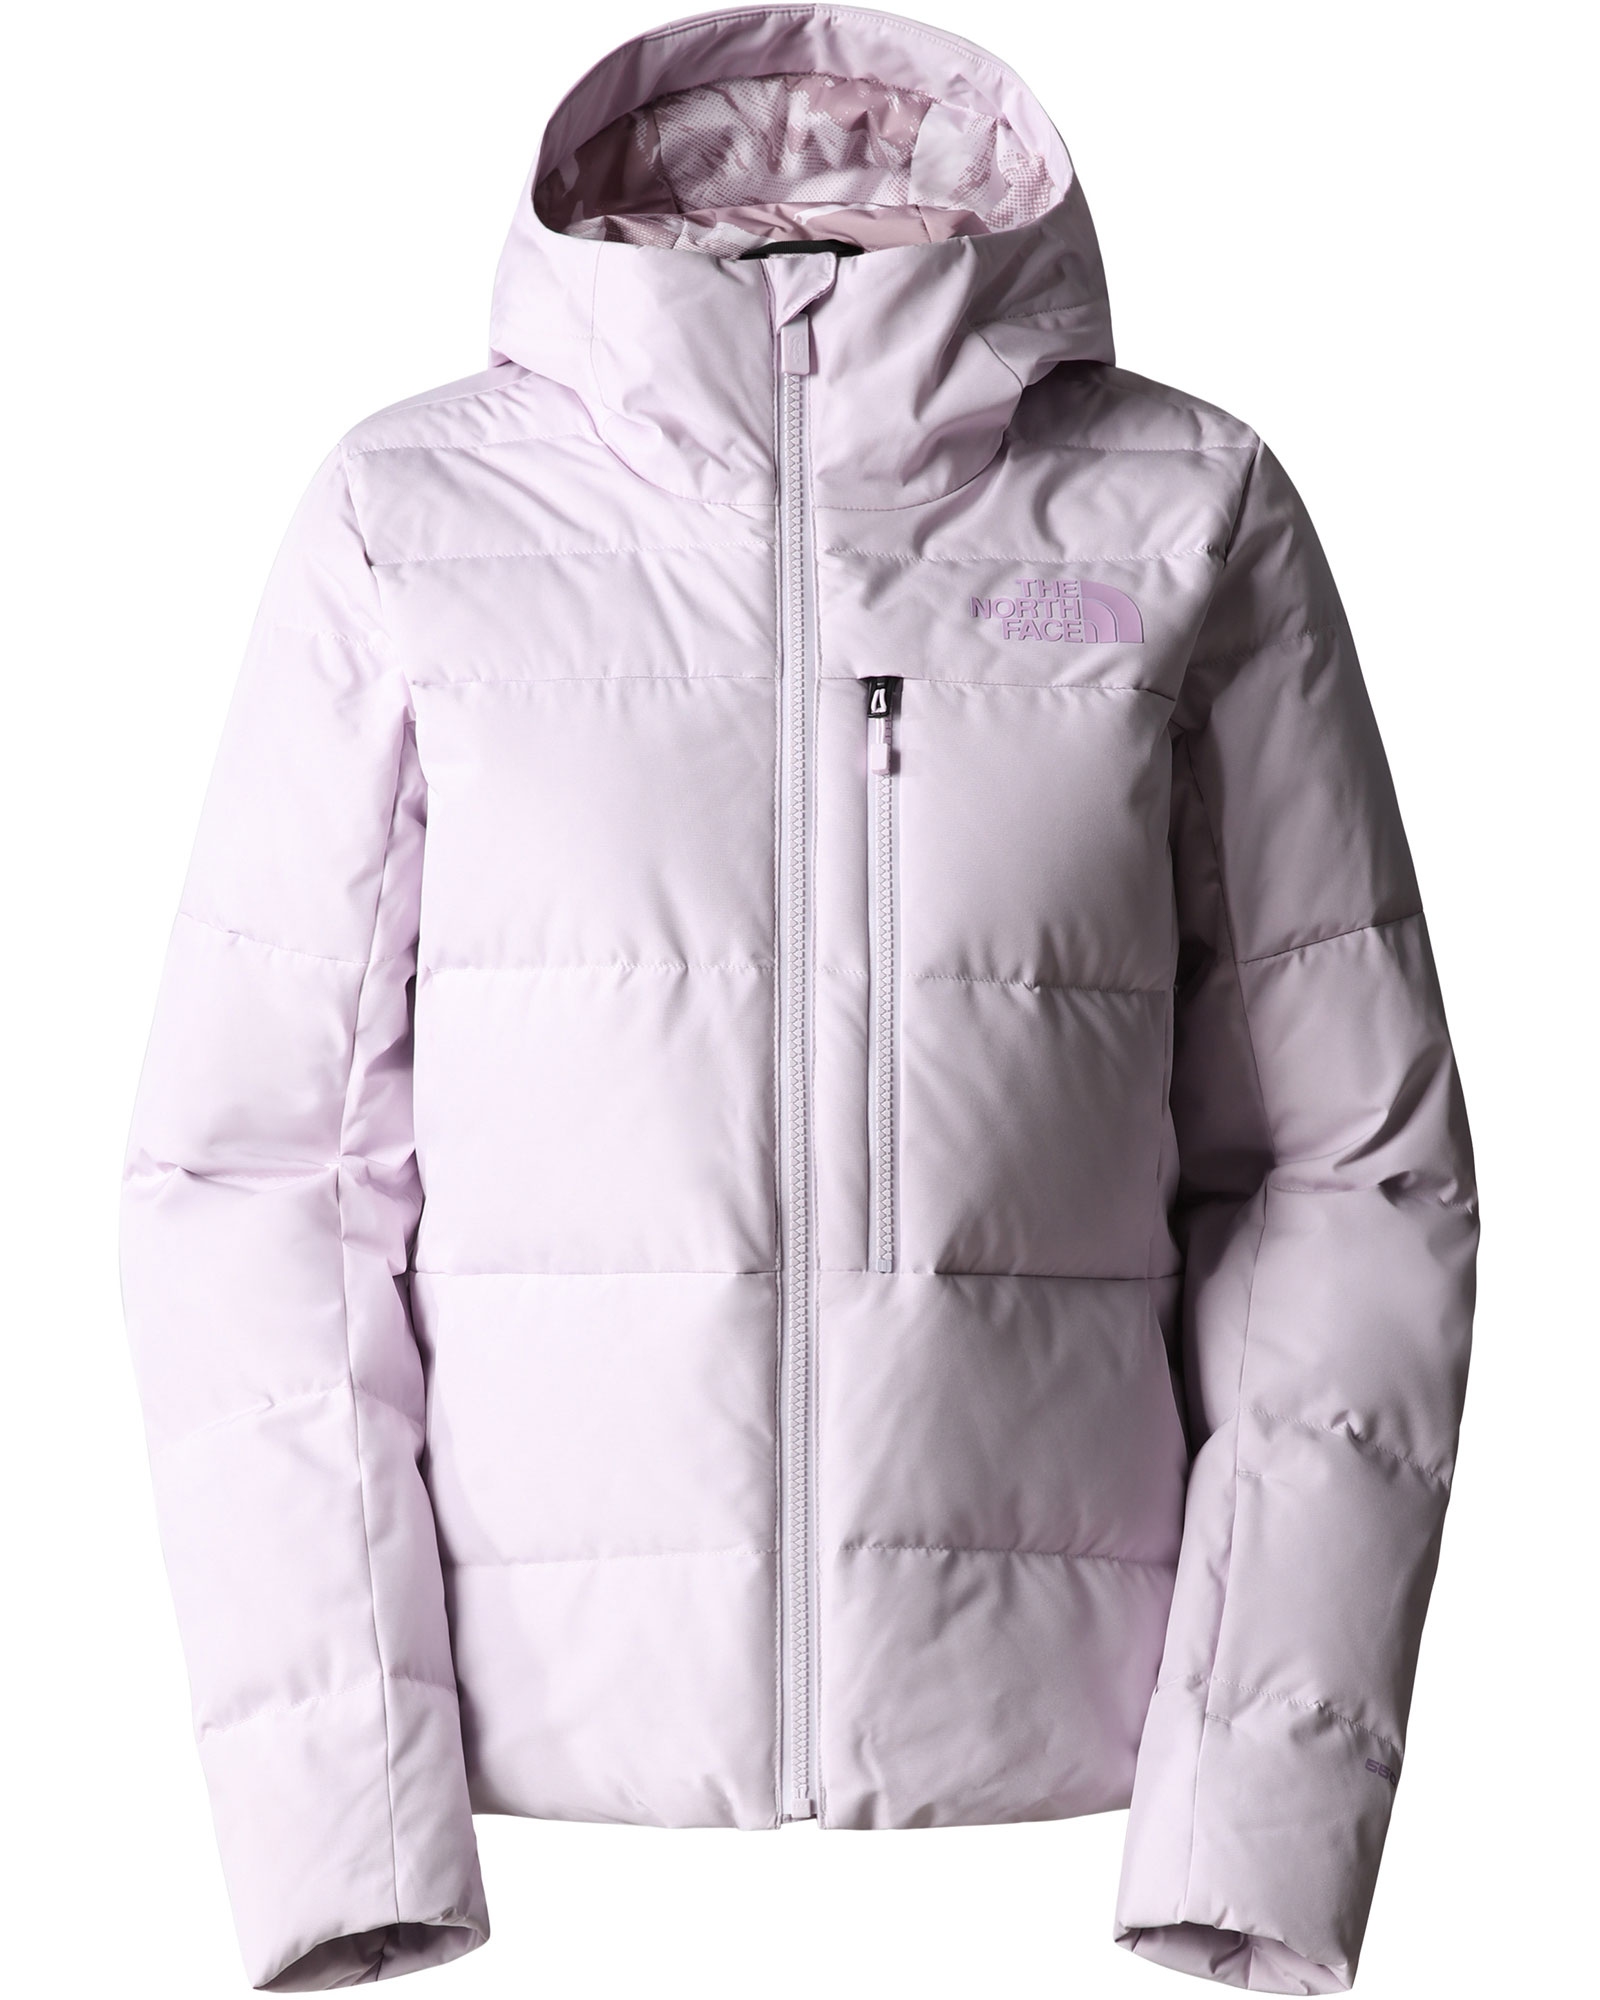 The North Face Heavenly Down Women’s Jacket - Lavender Fog Heather L